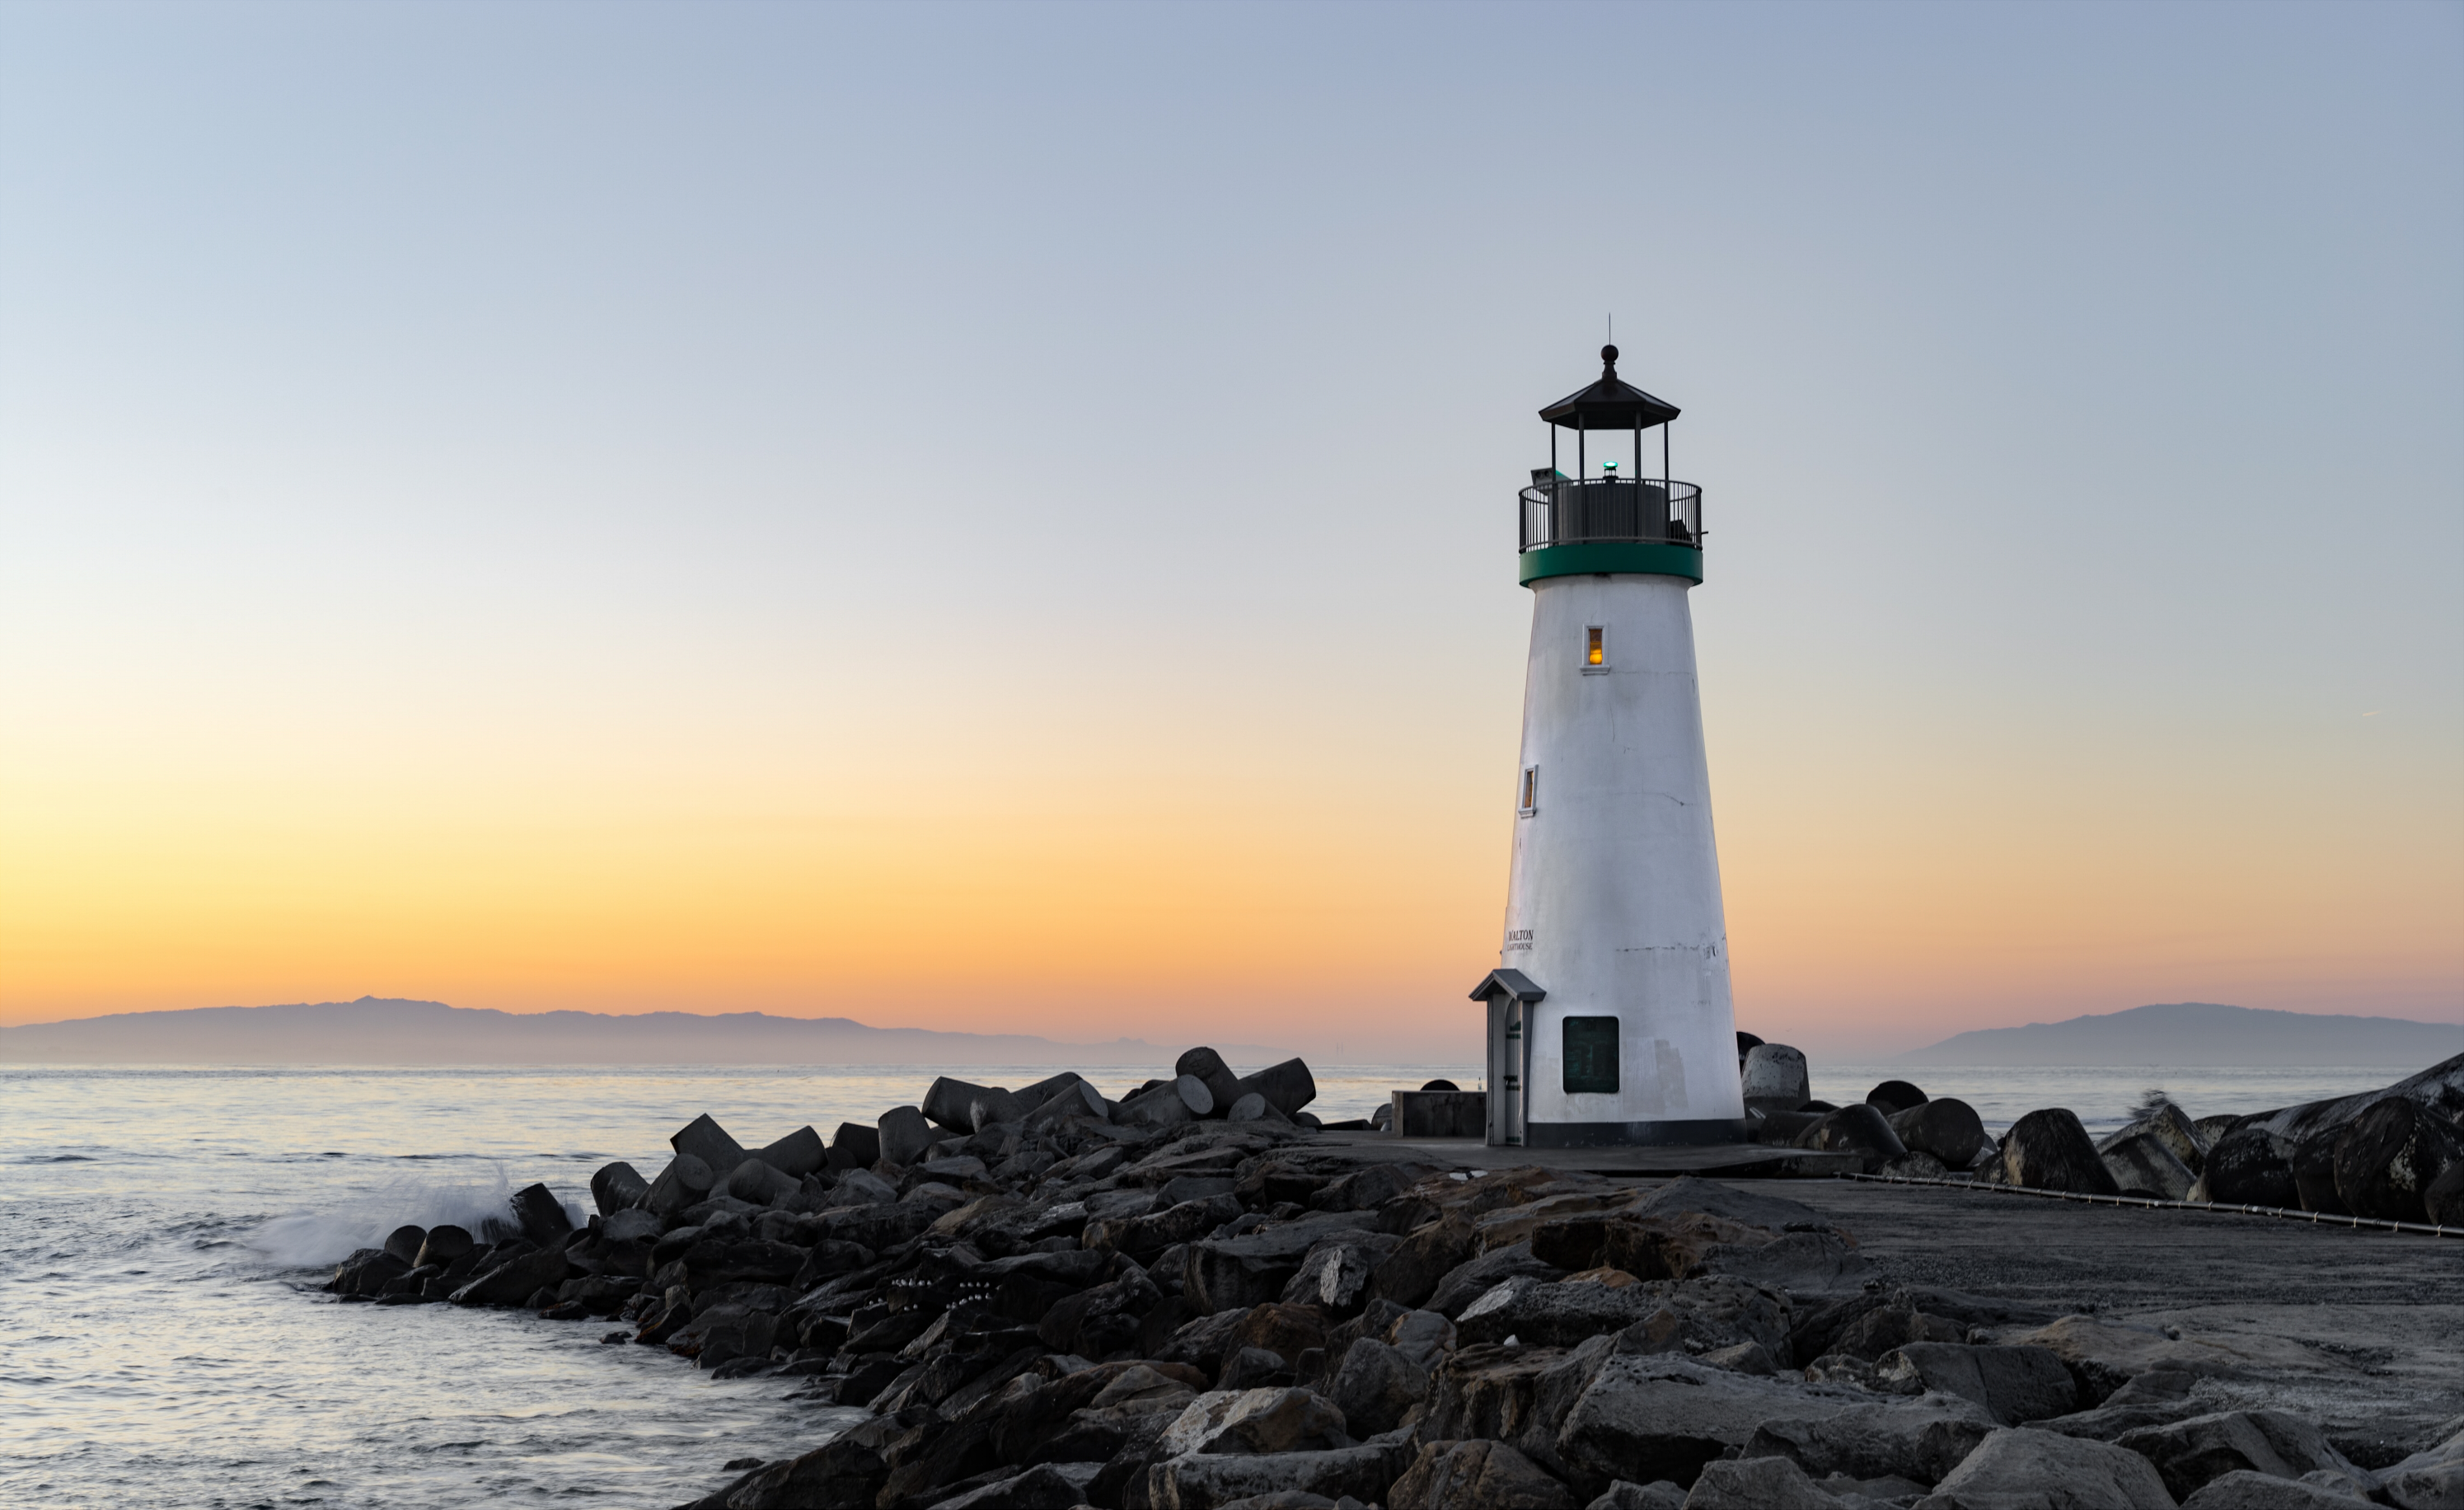 A lighthouse on a rocky cliff at sunset